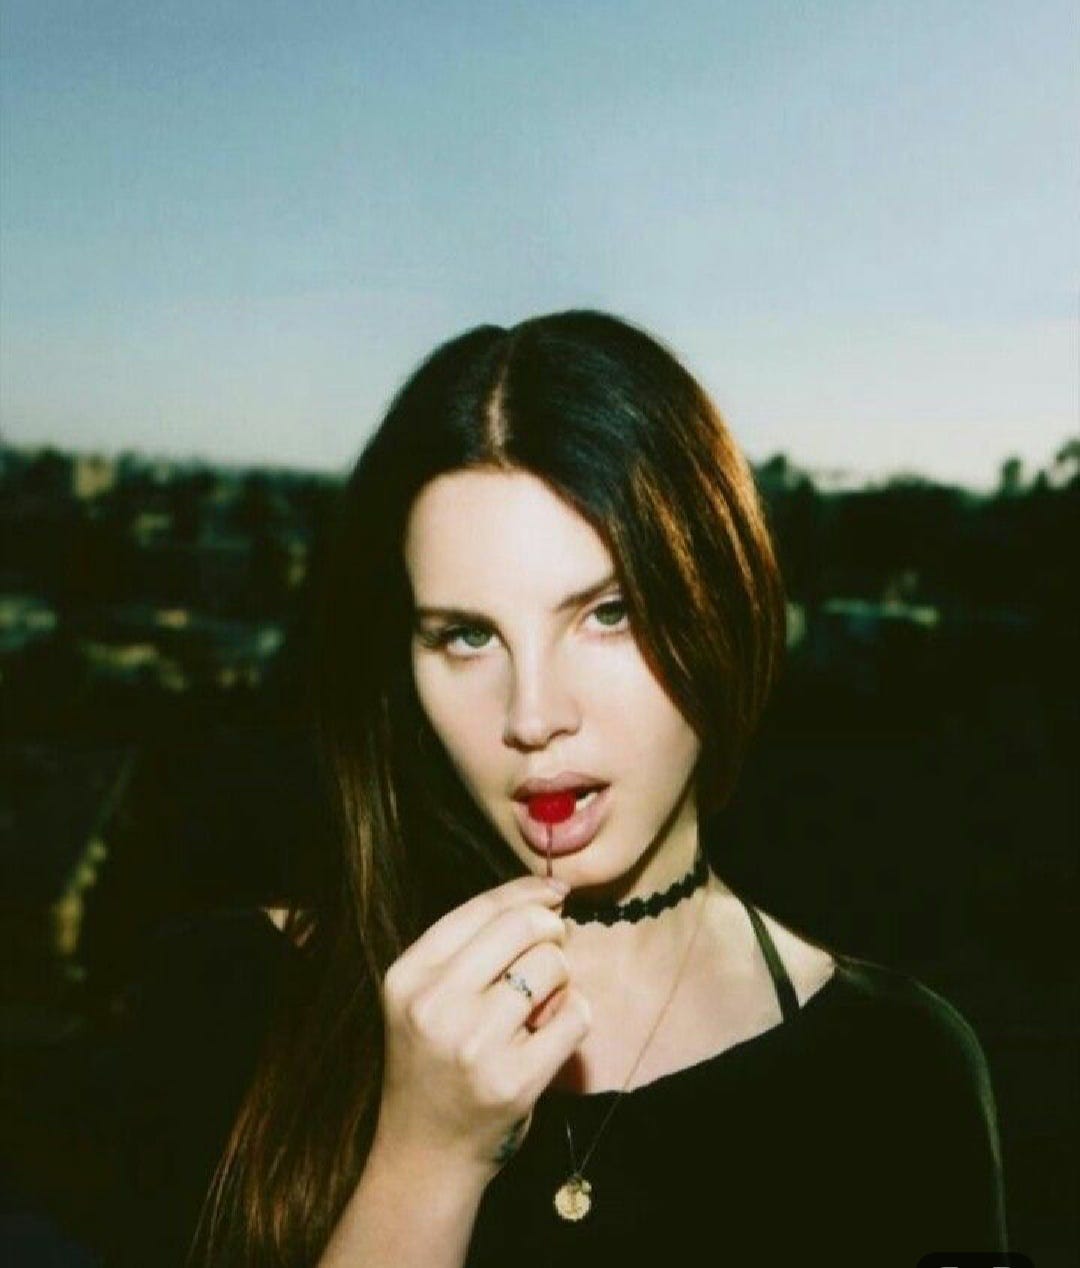 Lana Del Rey *DrEaM PoP*. “I will love you 'til the end of time” | by  Radhikaeverdeen | Medium